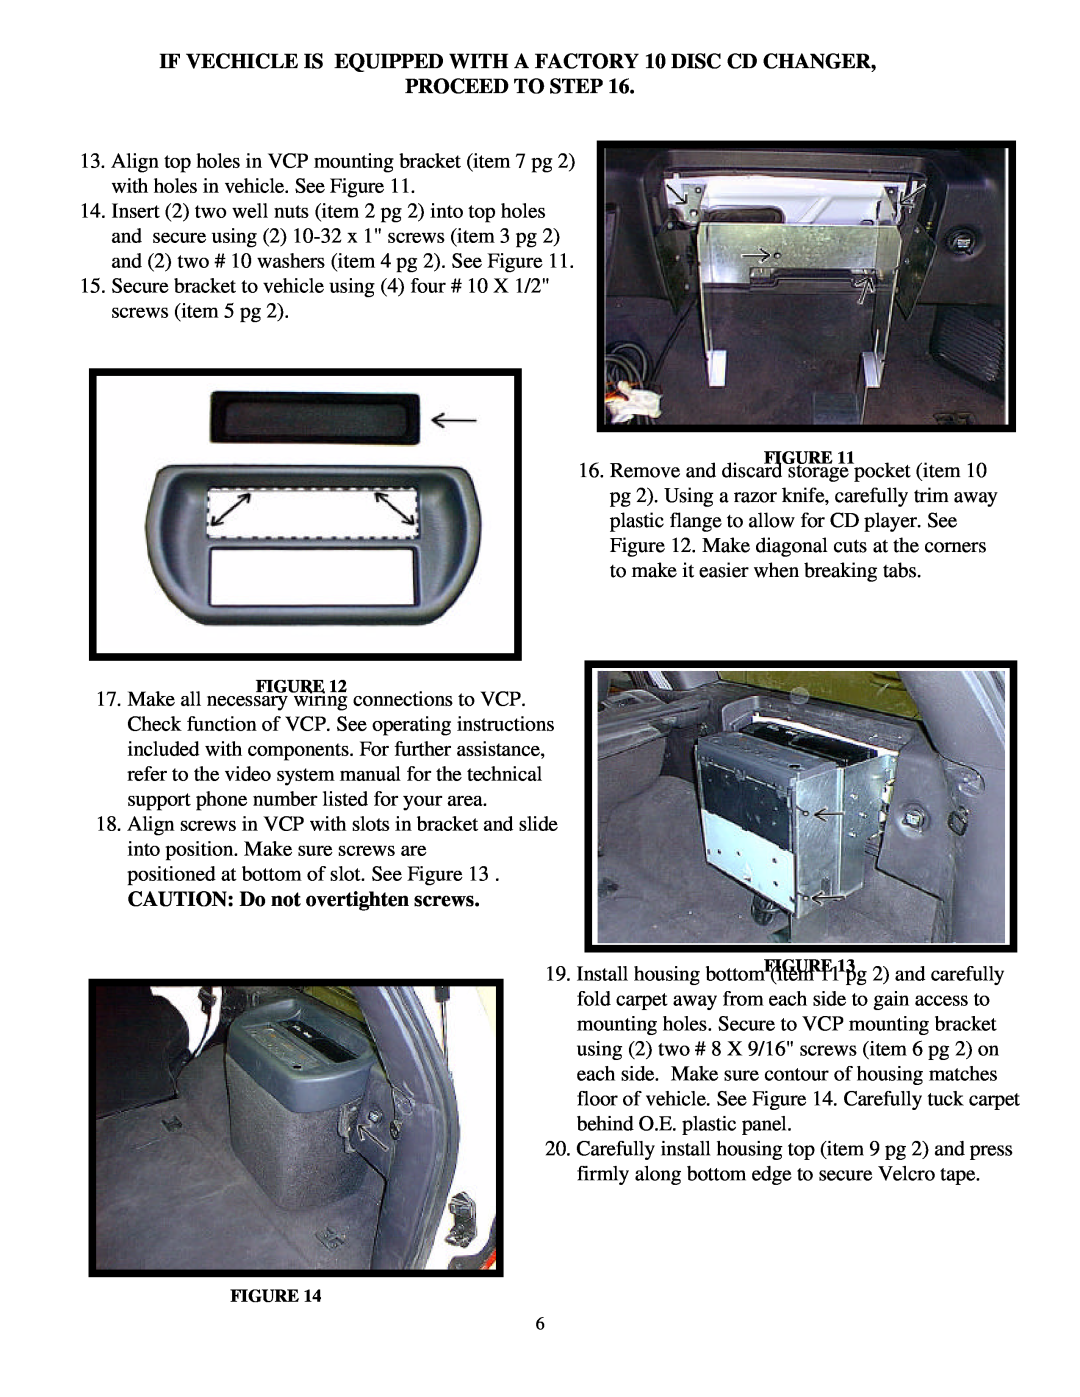 Jeep 50-0283x-017 SERIES IF VECHICLE IS EQUIPPED WITH A FACTORY 10 DISC CD CHANGER, CAUTION Do not overtighten screws 